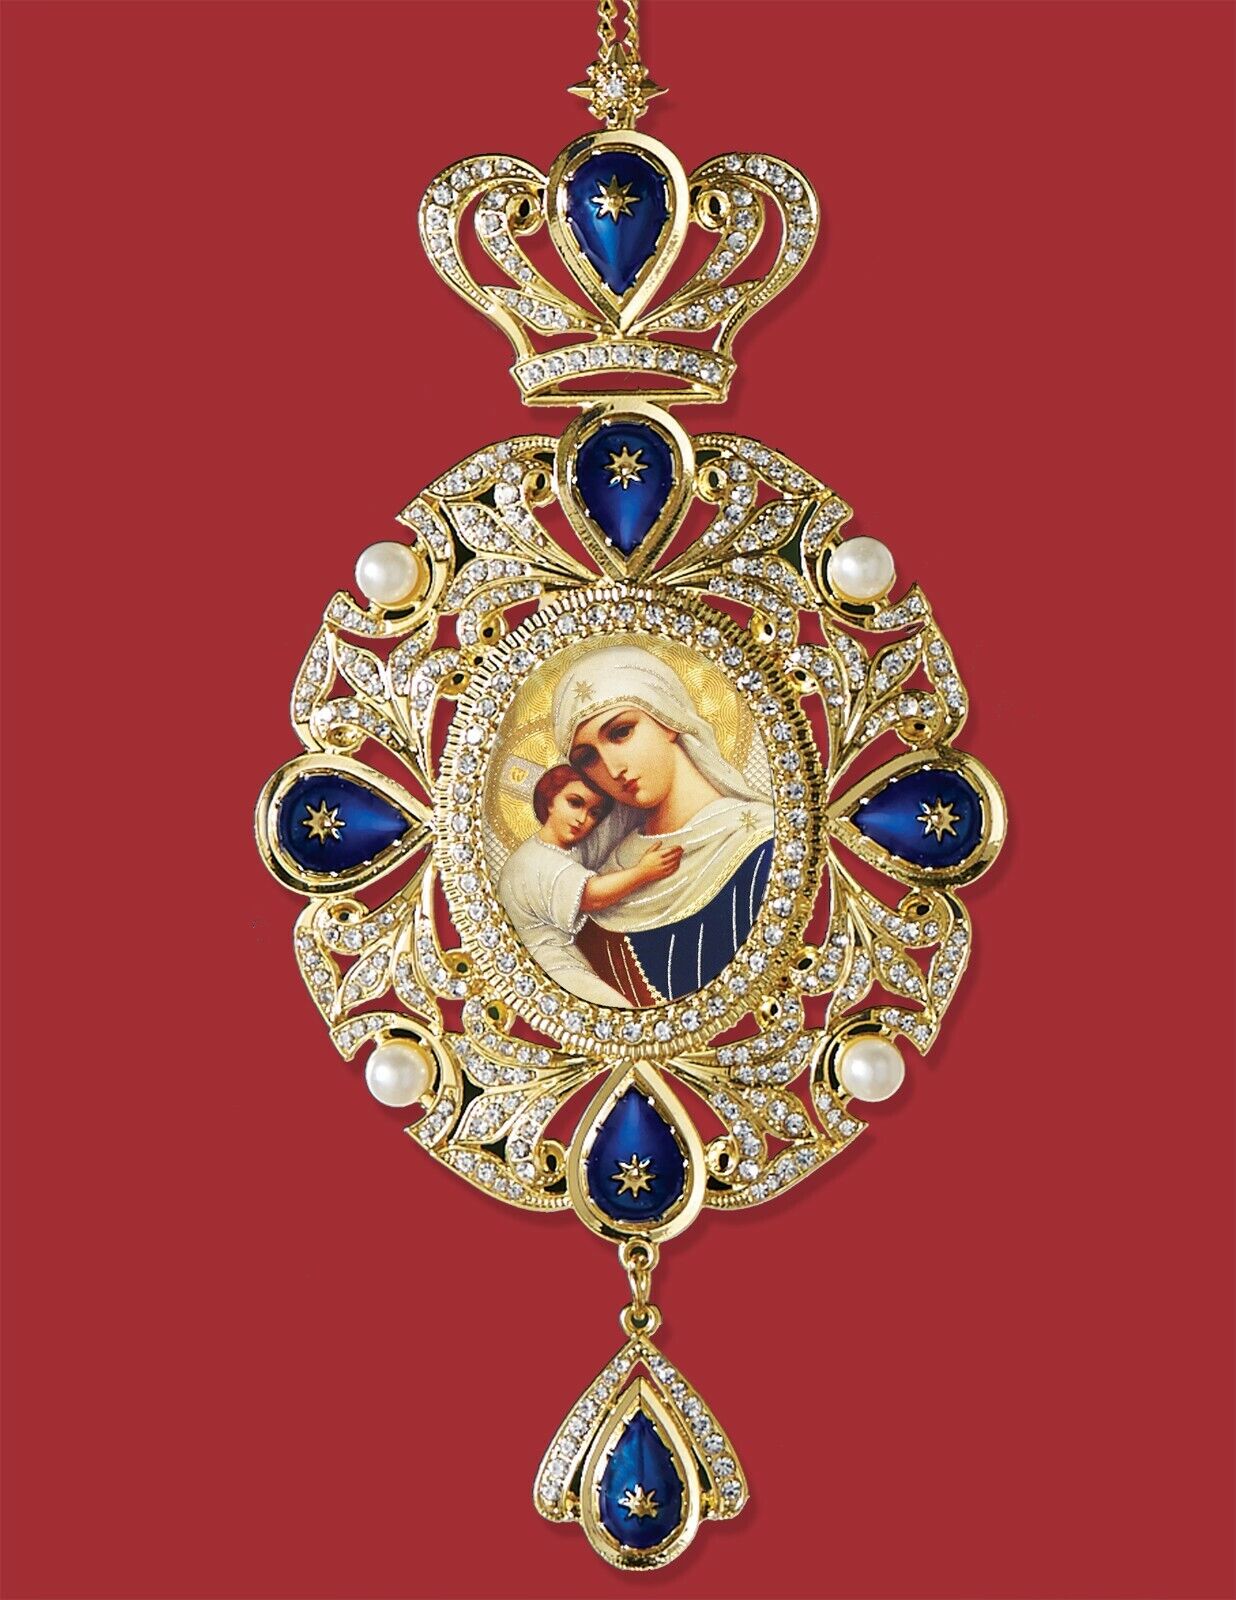 Virgin Mary and Child Christ Icon Ornament W Pearls Panagia Style Room Decor